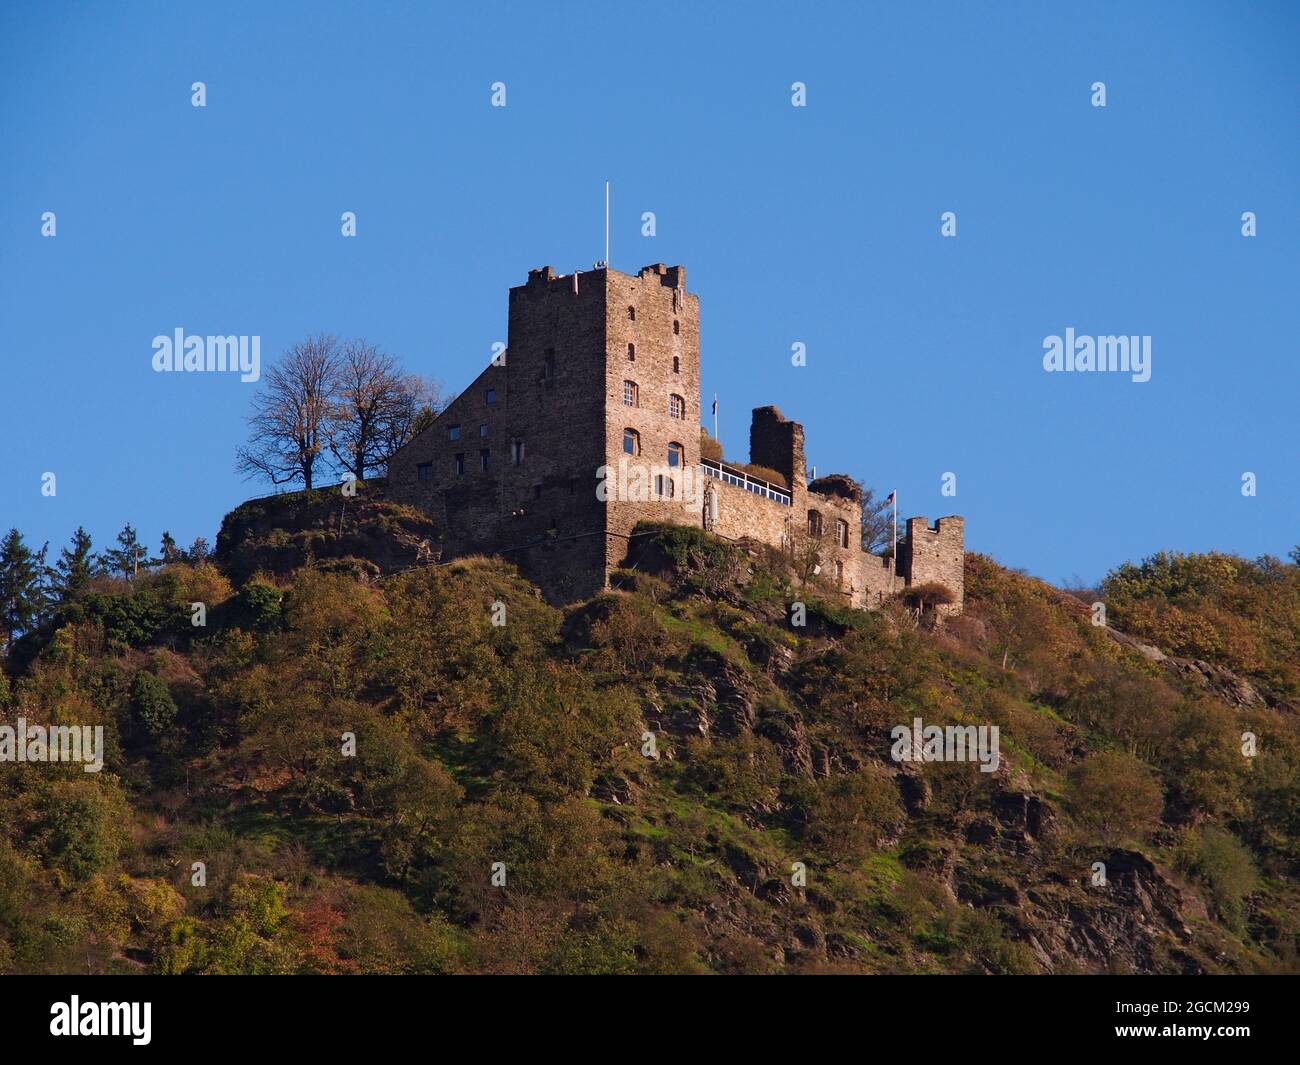 Liebenstein castle owned by one of hostile brother on the hills of the River Rhine in Germany Stock Photo